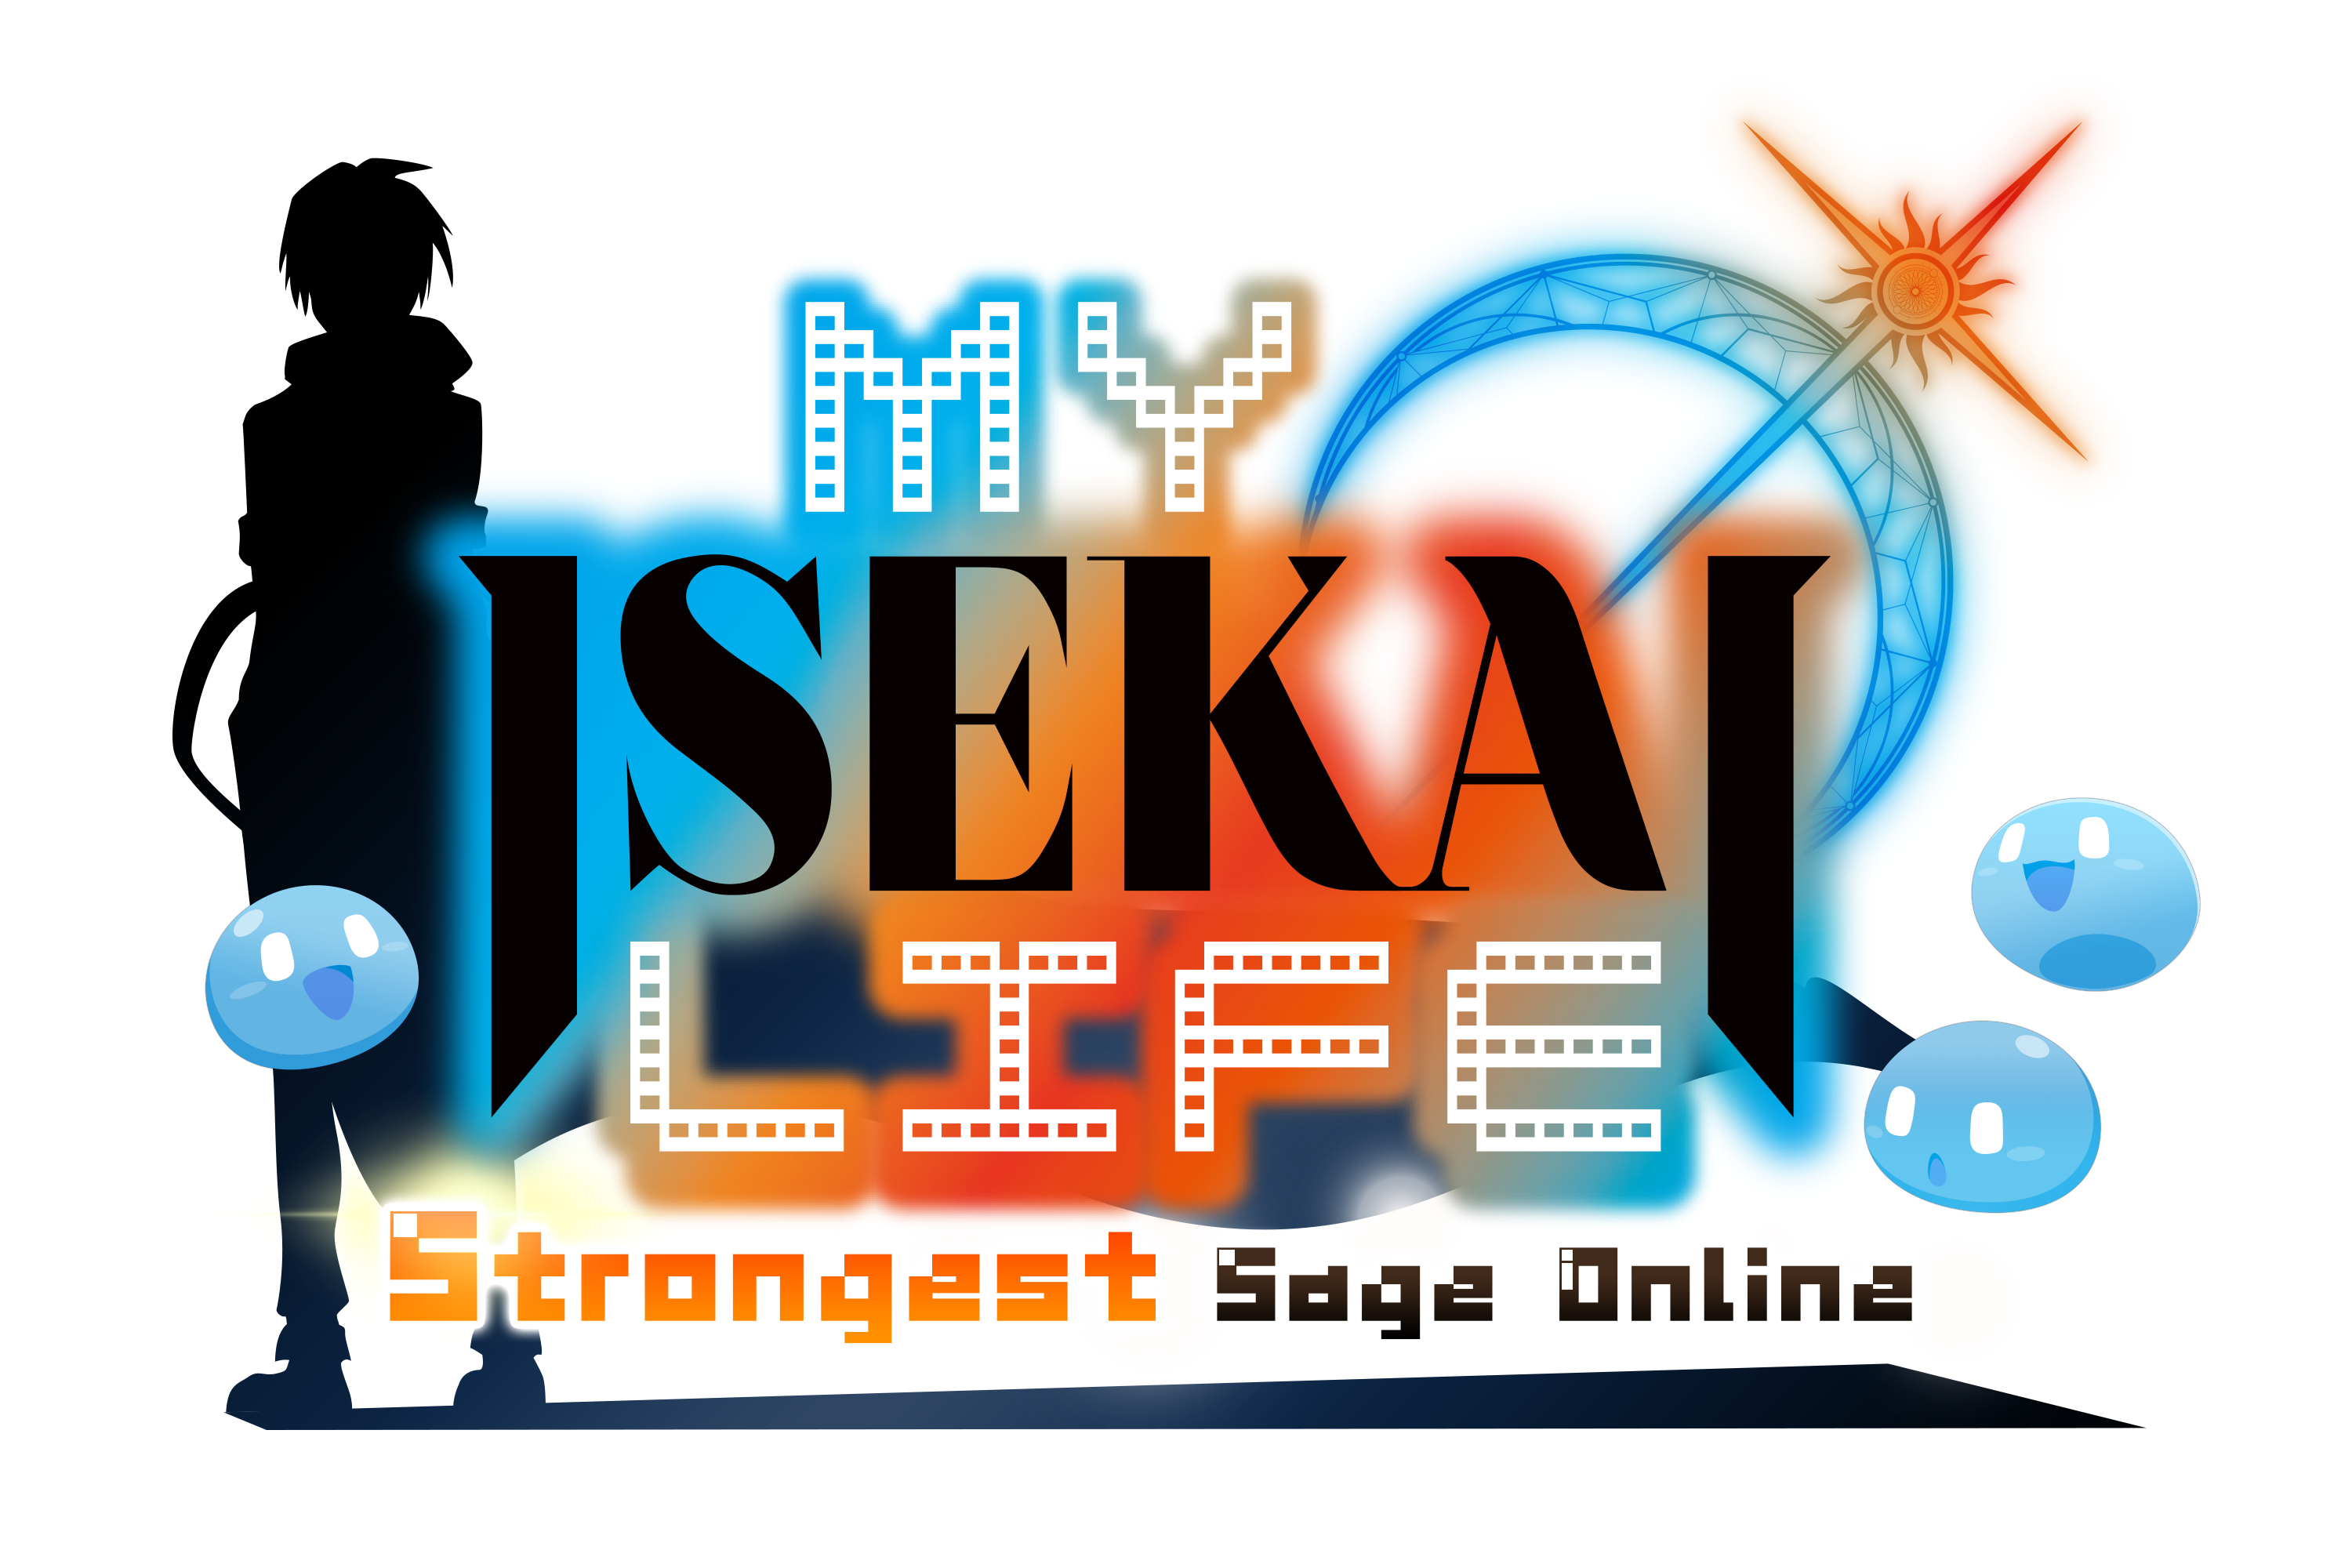 Anime Like My Isekai Life: I Gained a Second Character Class and Became the  Strongest Sage in the World!